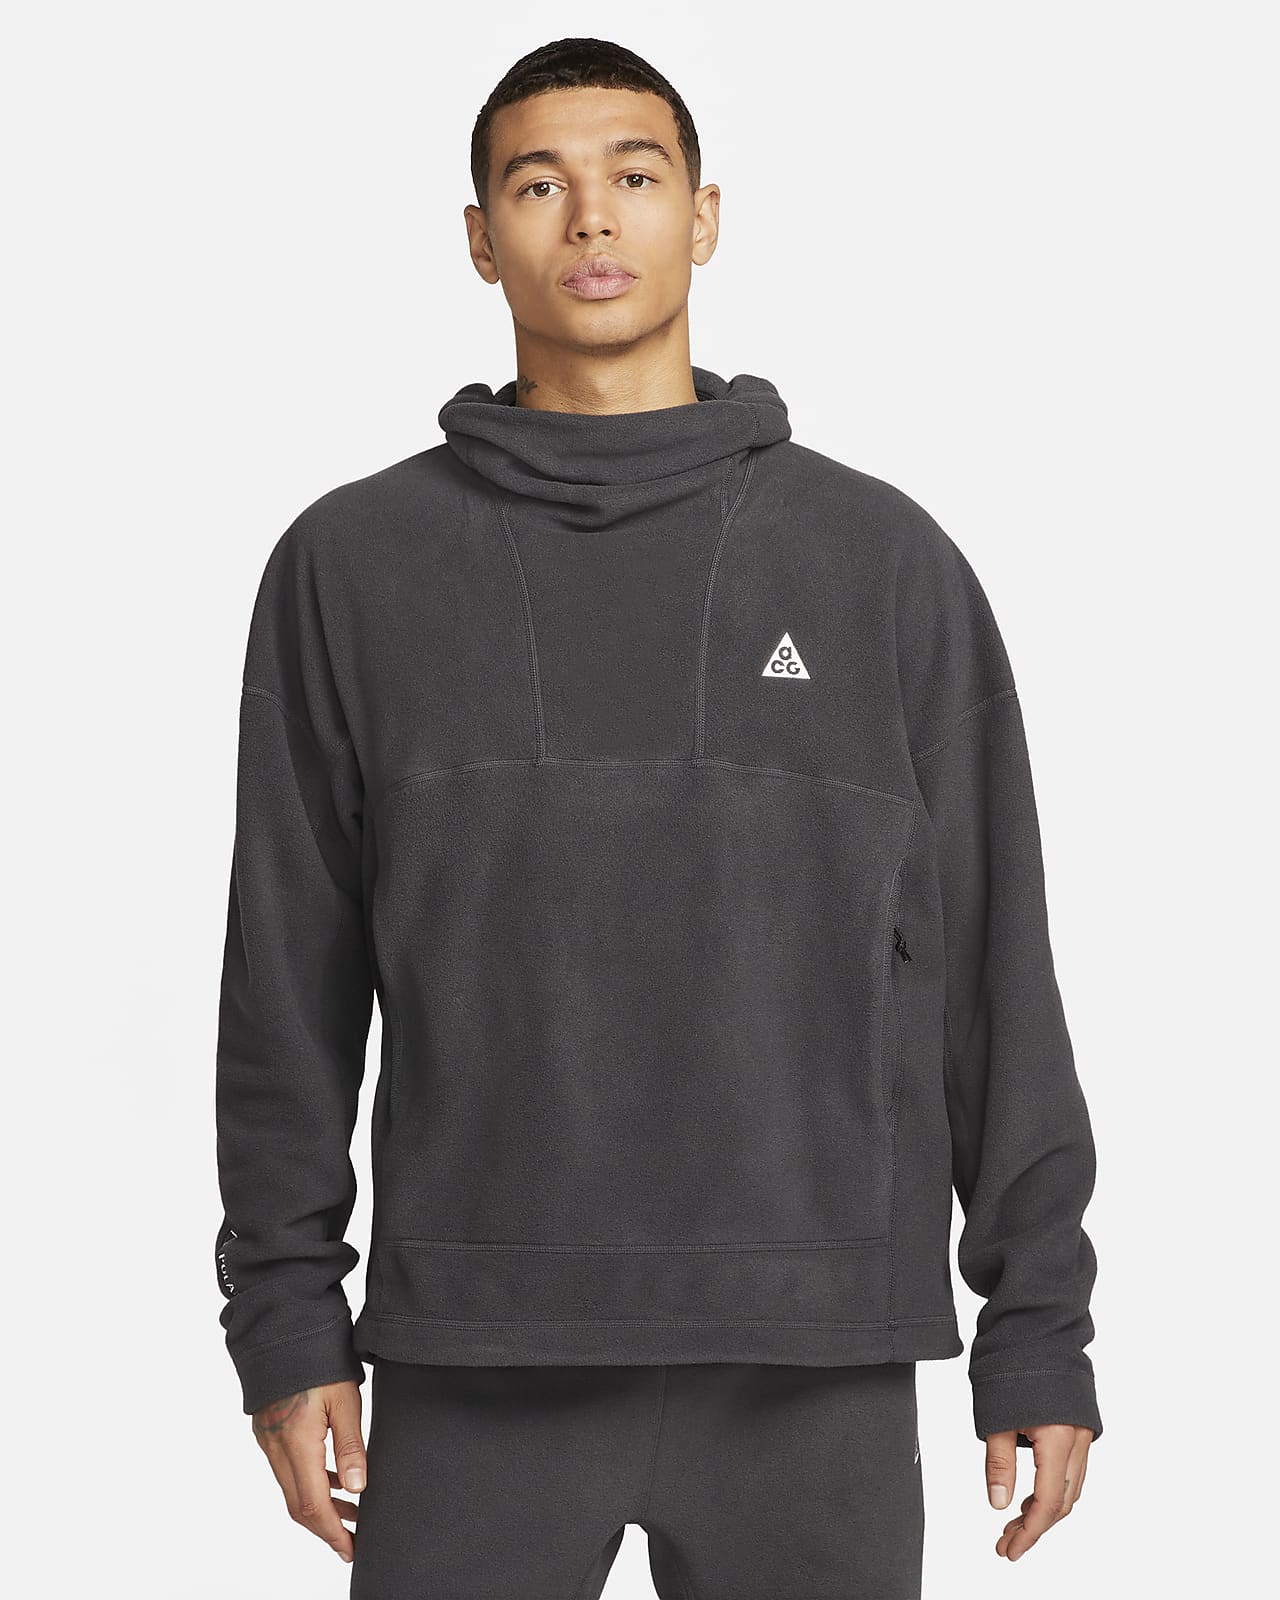 ACG Therma-FIT "Wolf Tree" Men's Pullover Hoodie. Nike.com